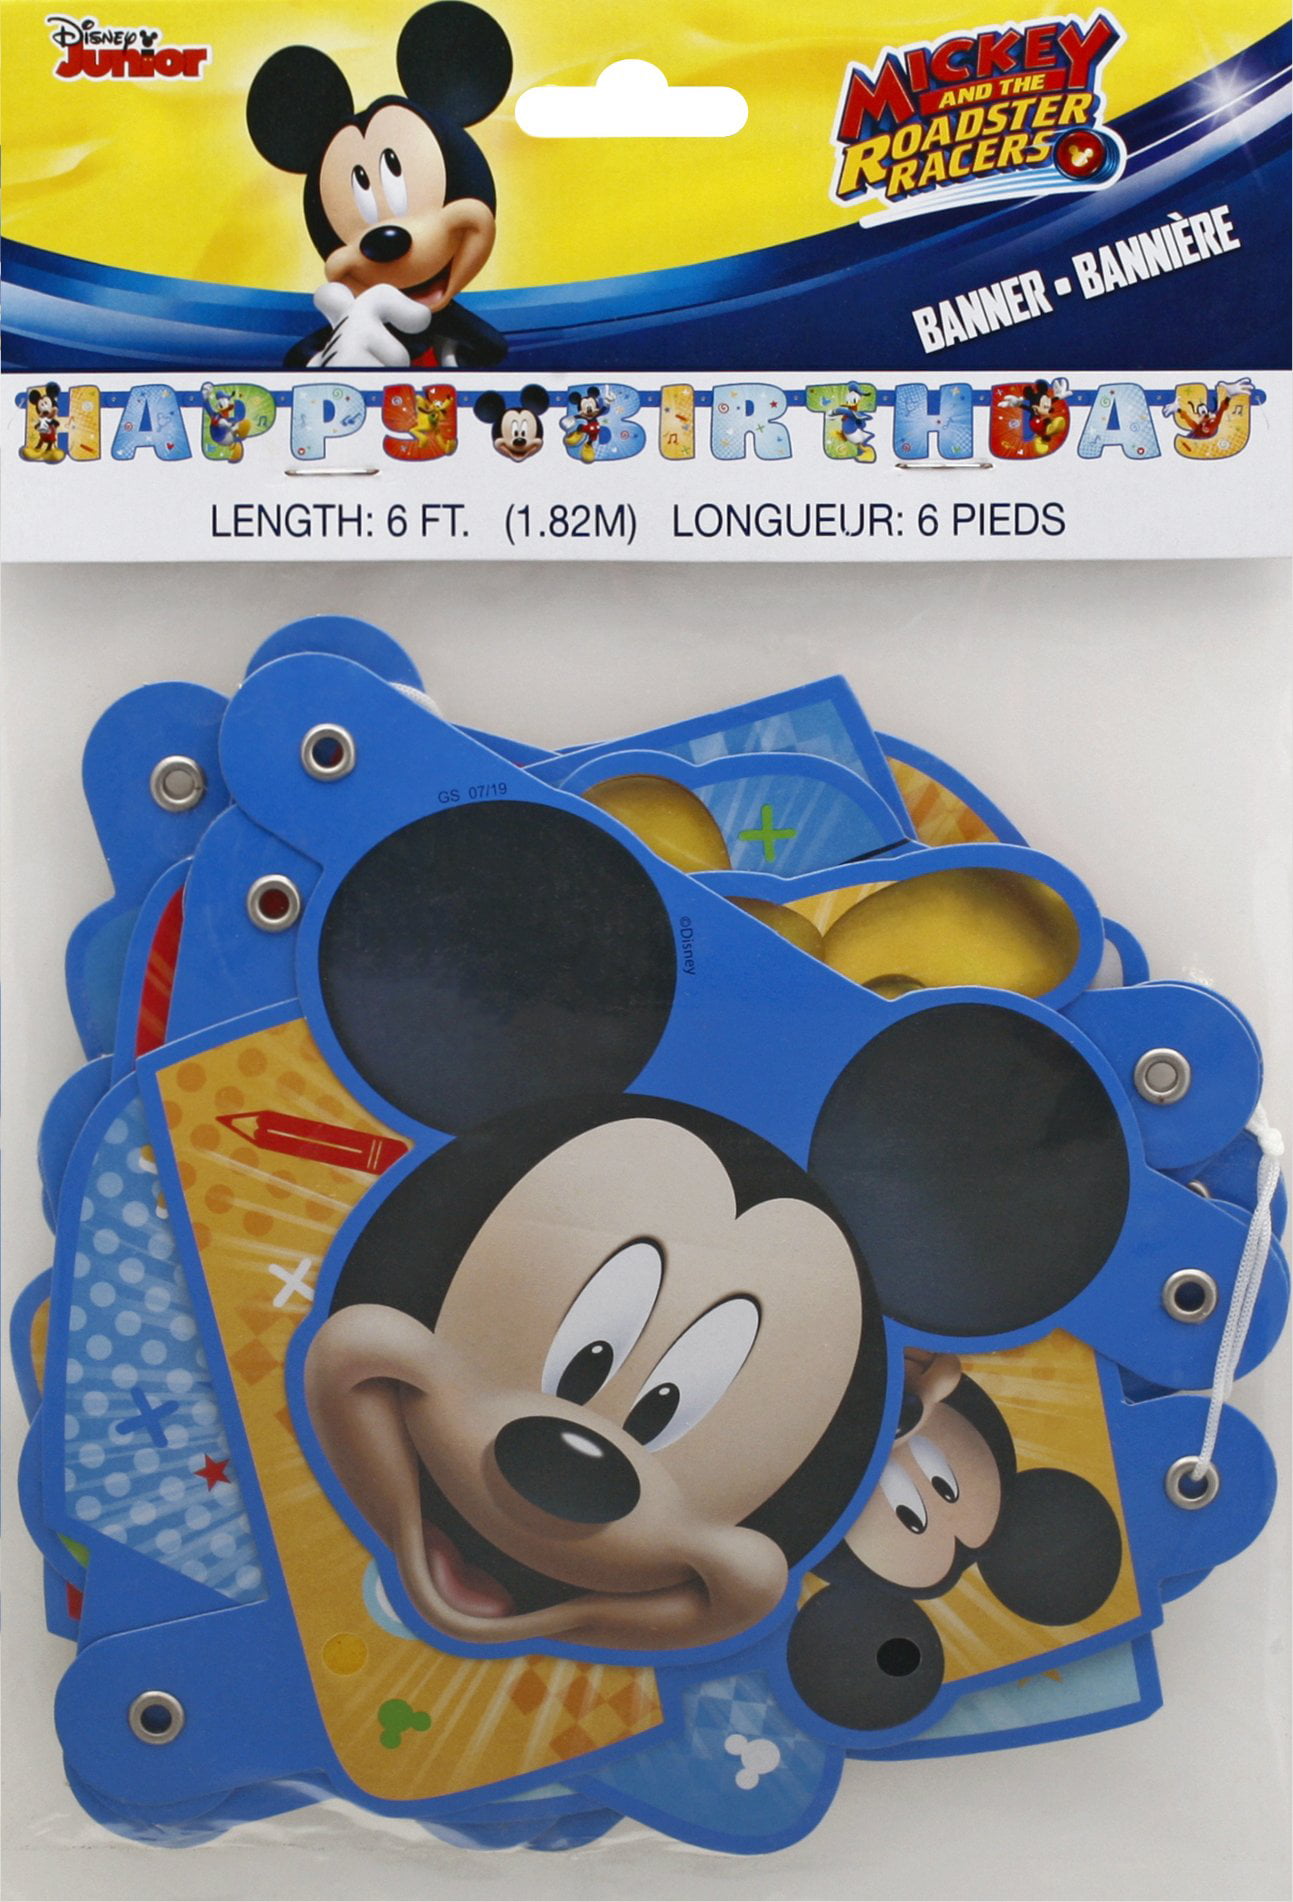 8 MICKEY MOUSE Roadster Racers INVITATIONS ~ Birthday Party Supplies Cards 